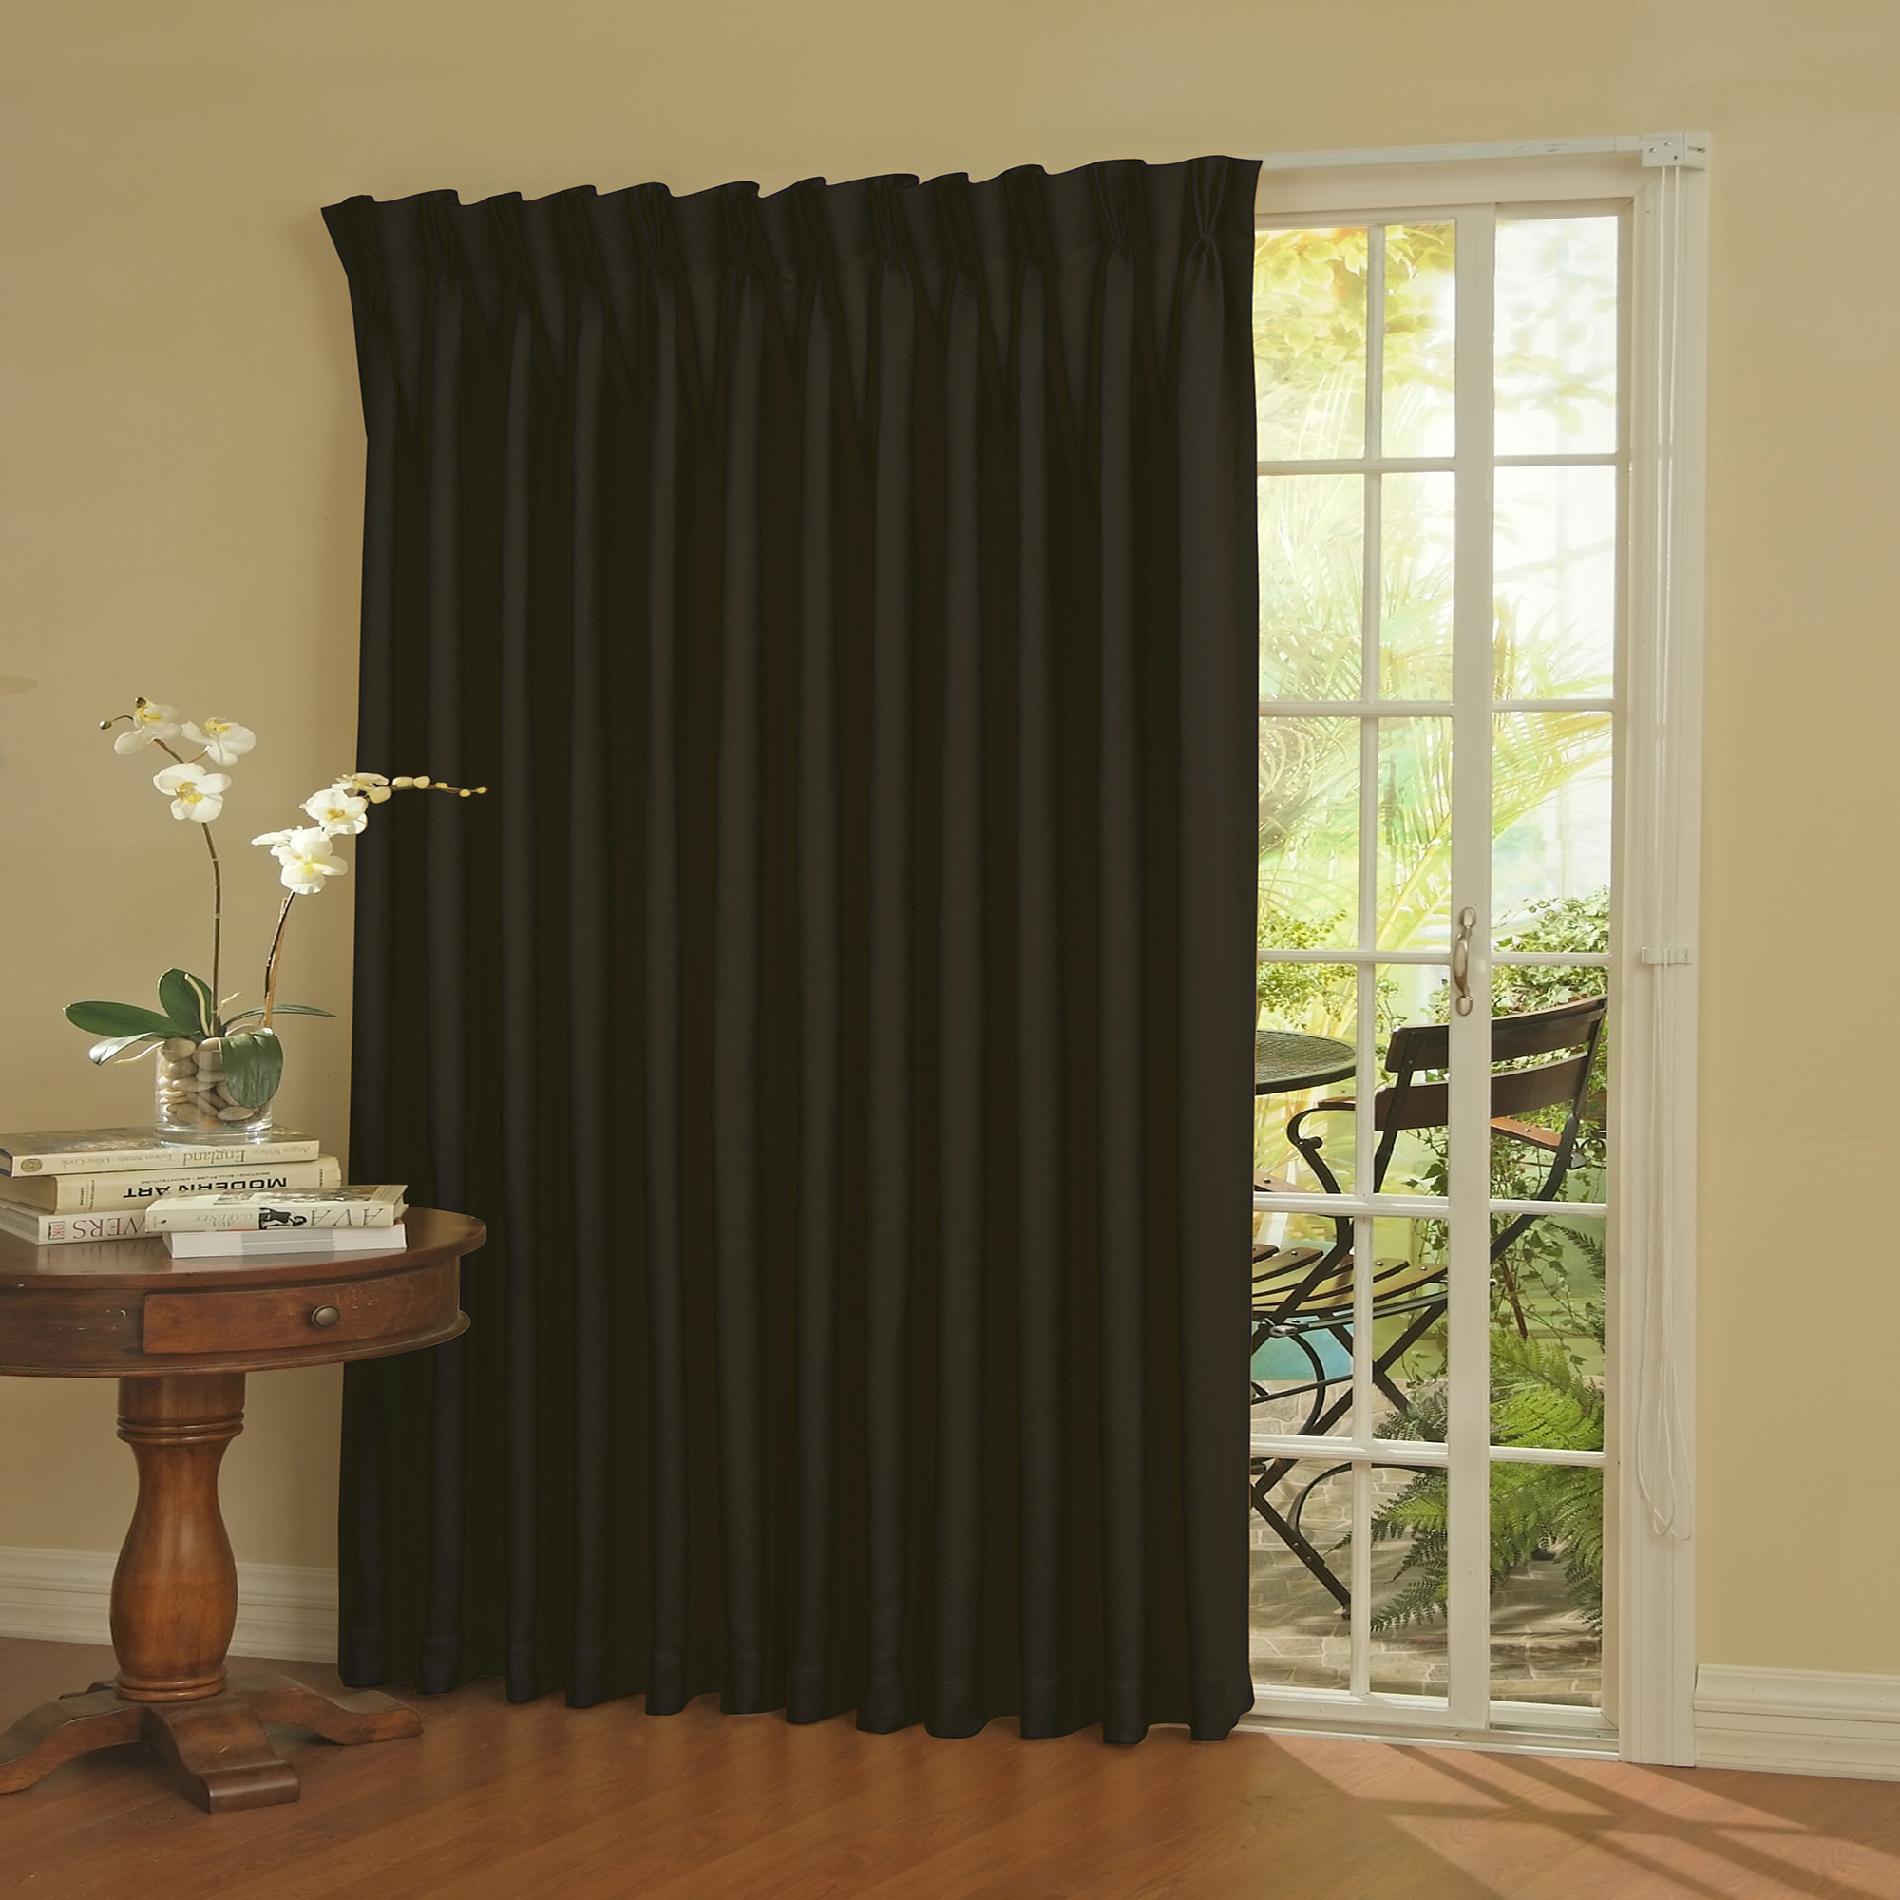 Eclipse Curtains Patio Door Thermal Blackout Curtain Panel